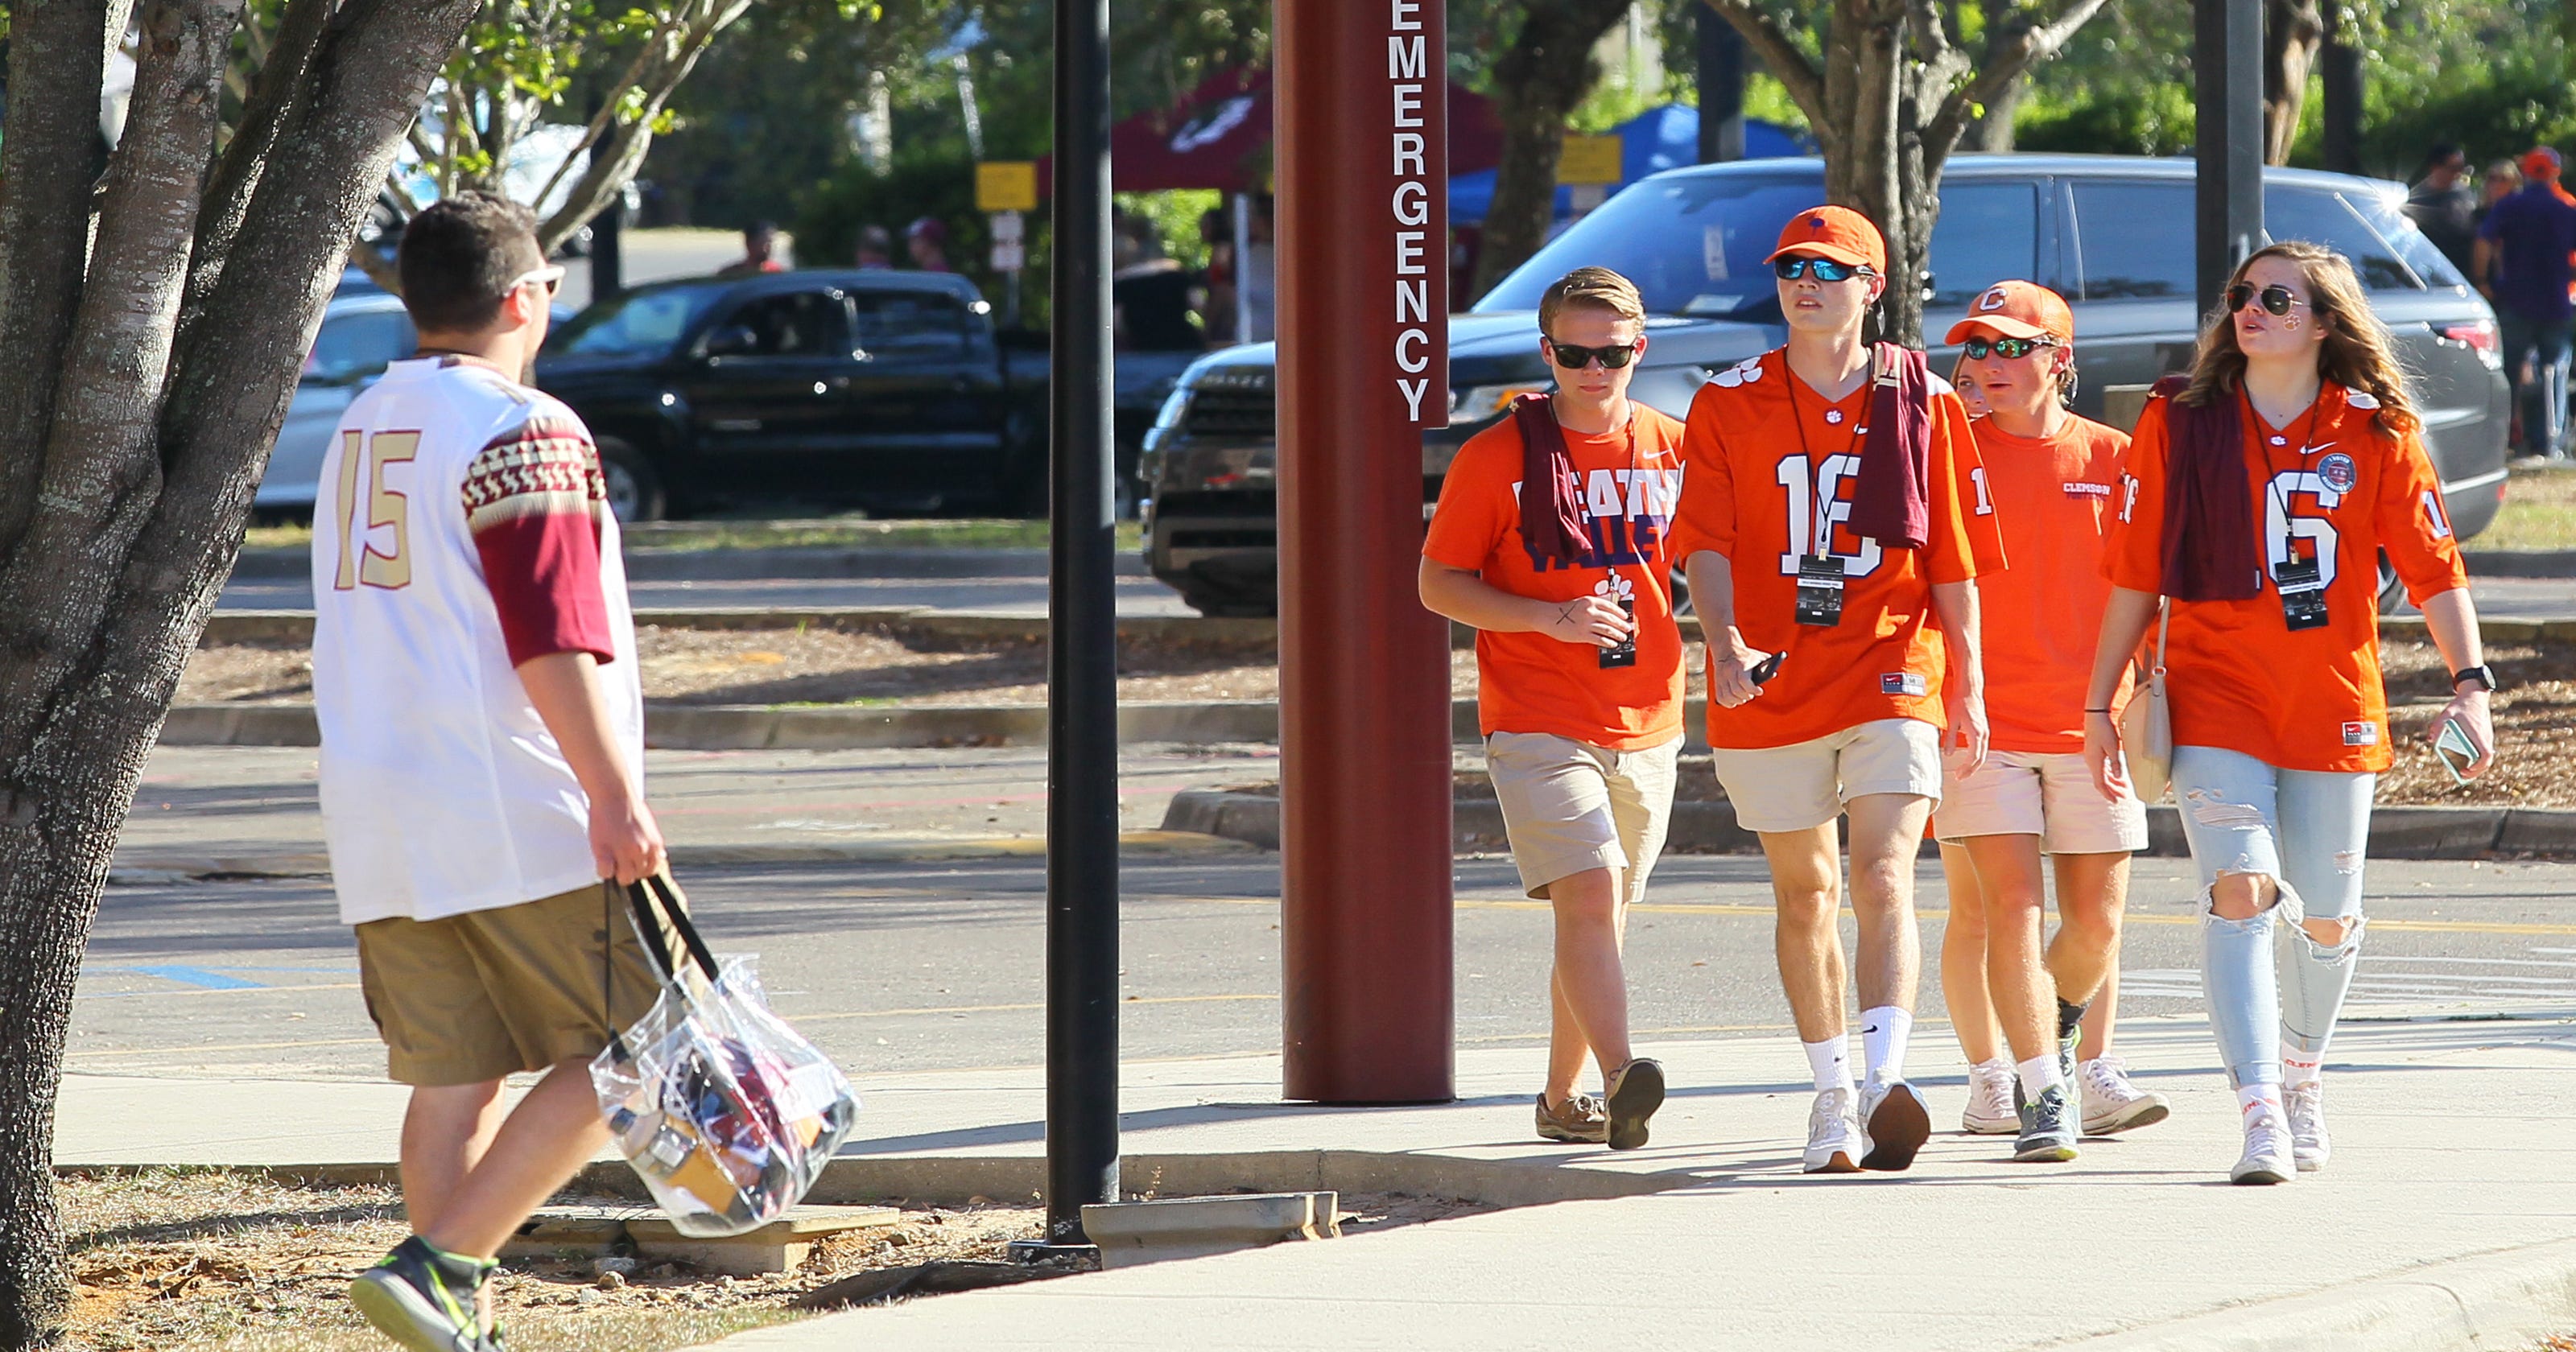 Outofstate tuition has increased 21 at Clemson in 5 years. Here's why.